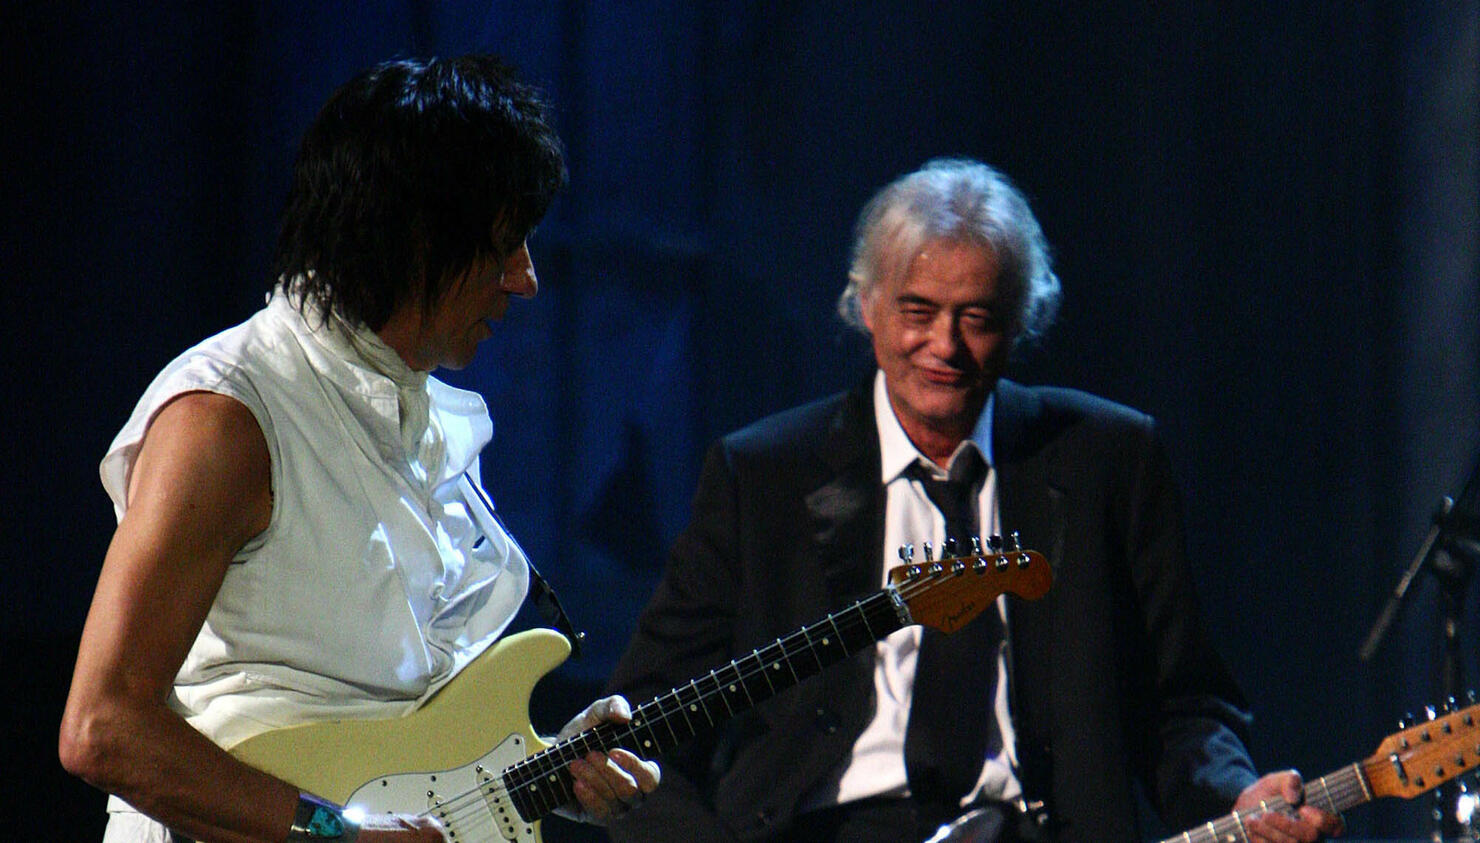 24th Annual Rock and Roll Hall of Fame Induction Ceremony - Show